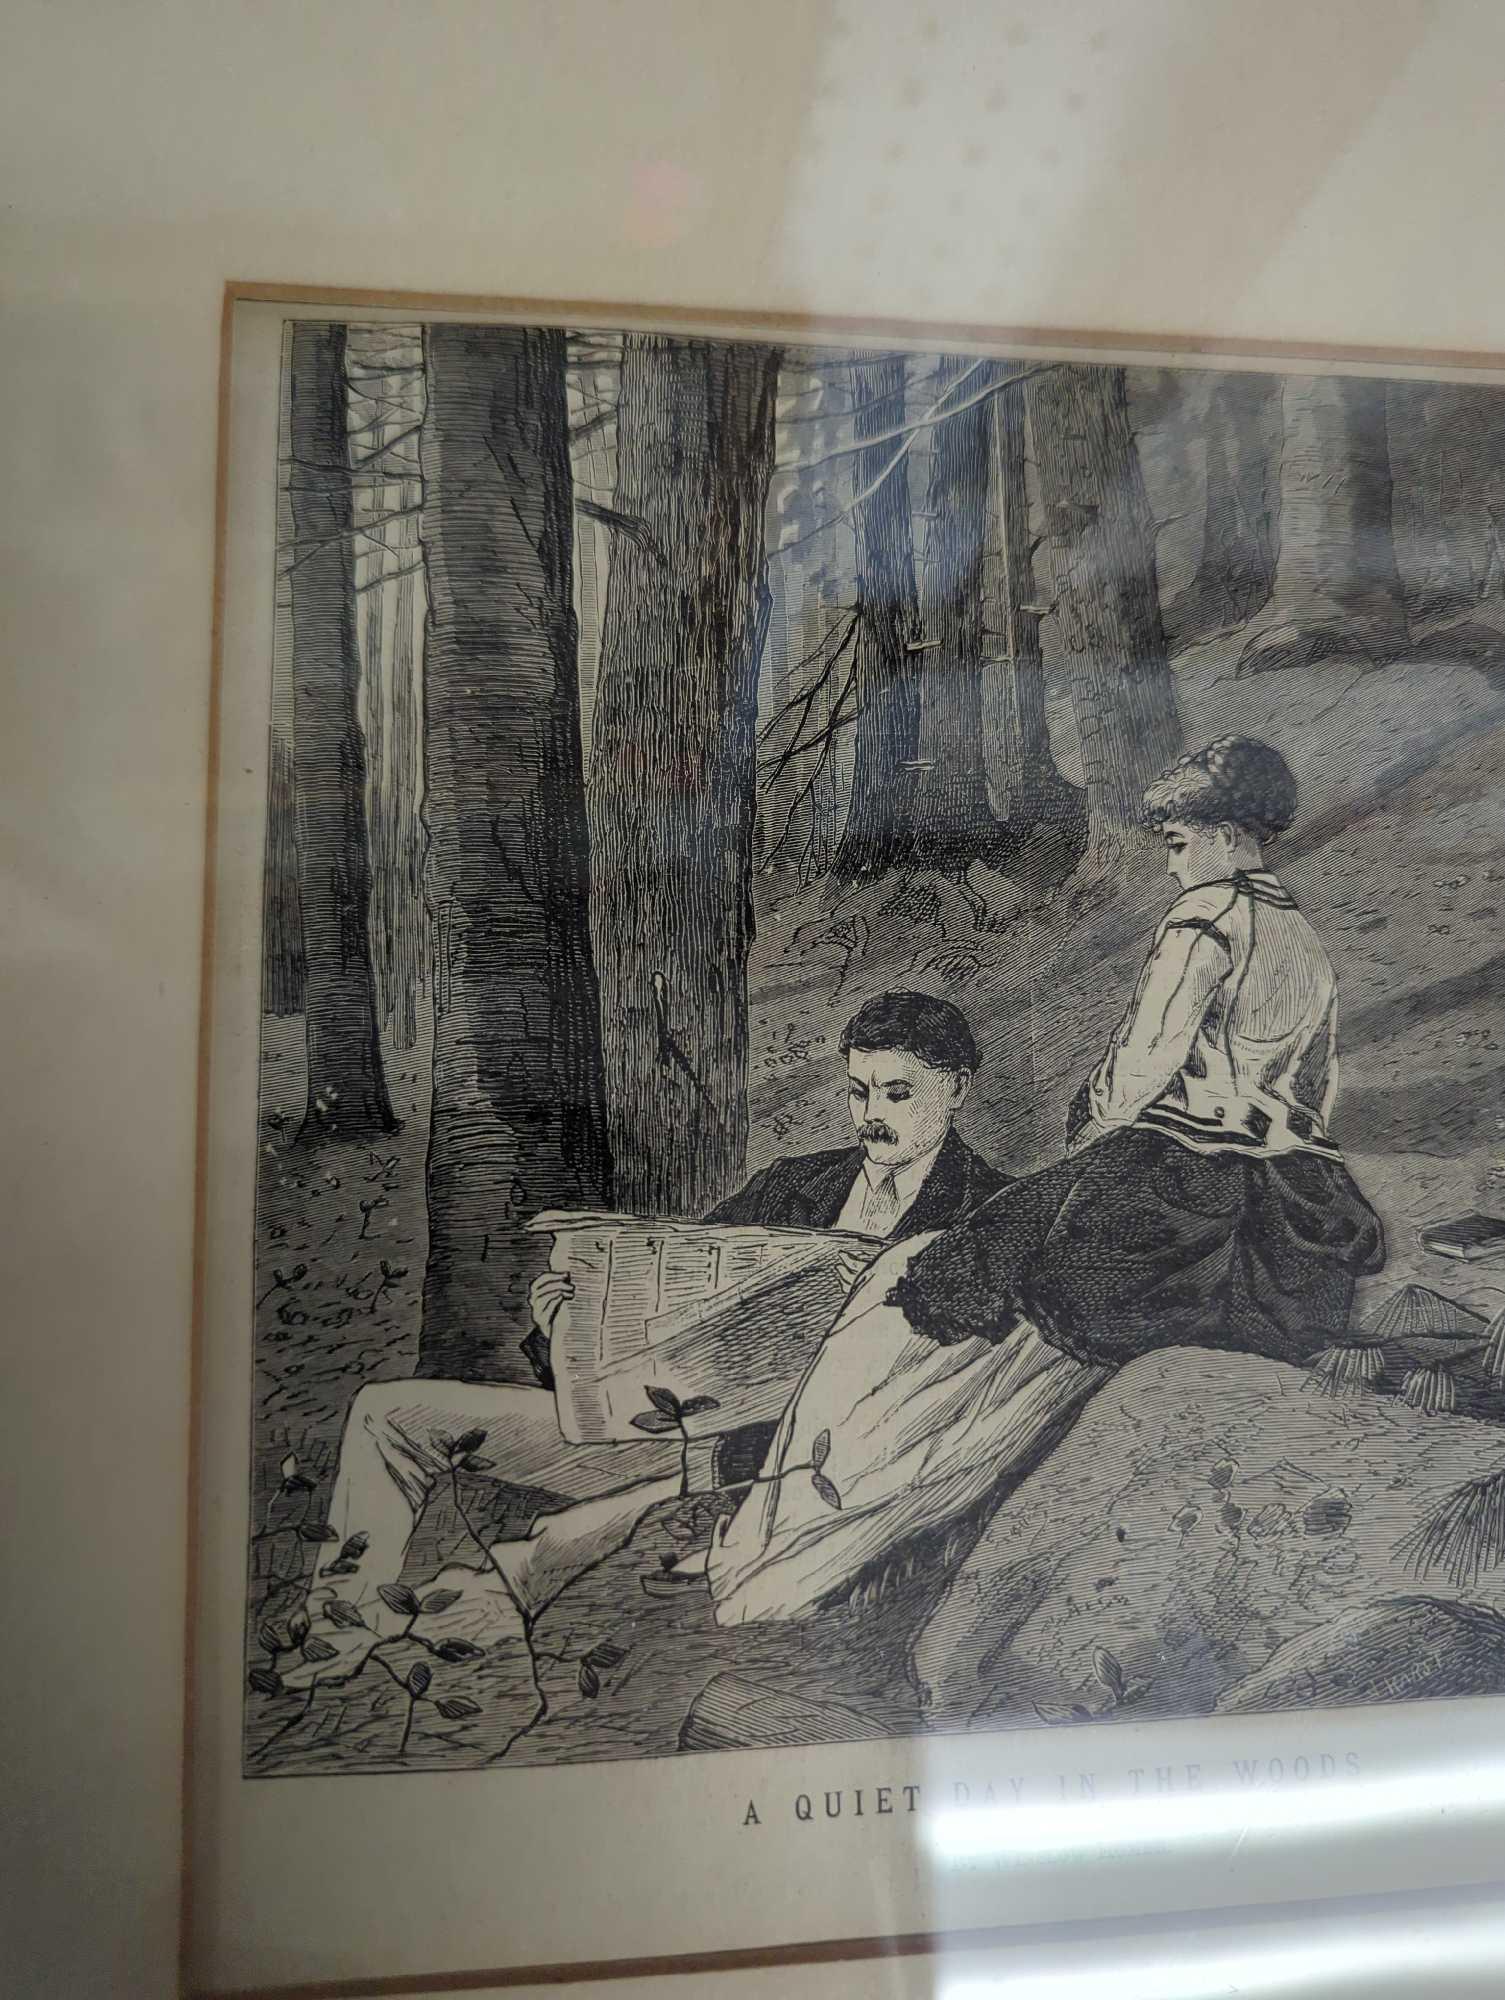 Framed Print of "A Quiet Day in the Woods" by Winslow Homer, Approximate Dimensions - 17" x 14",